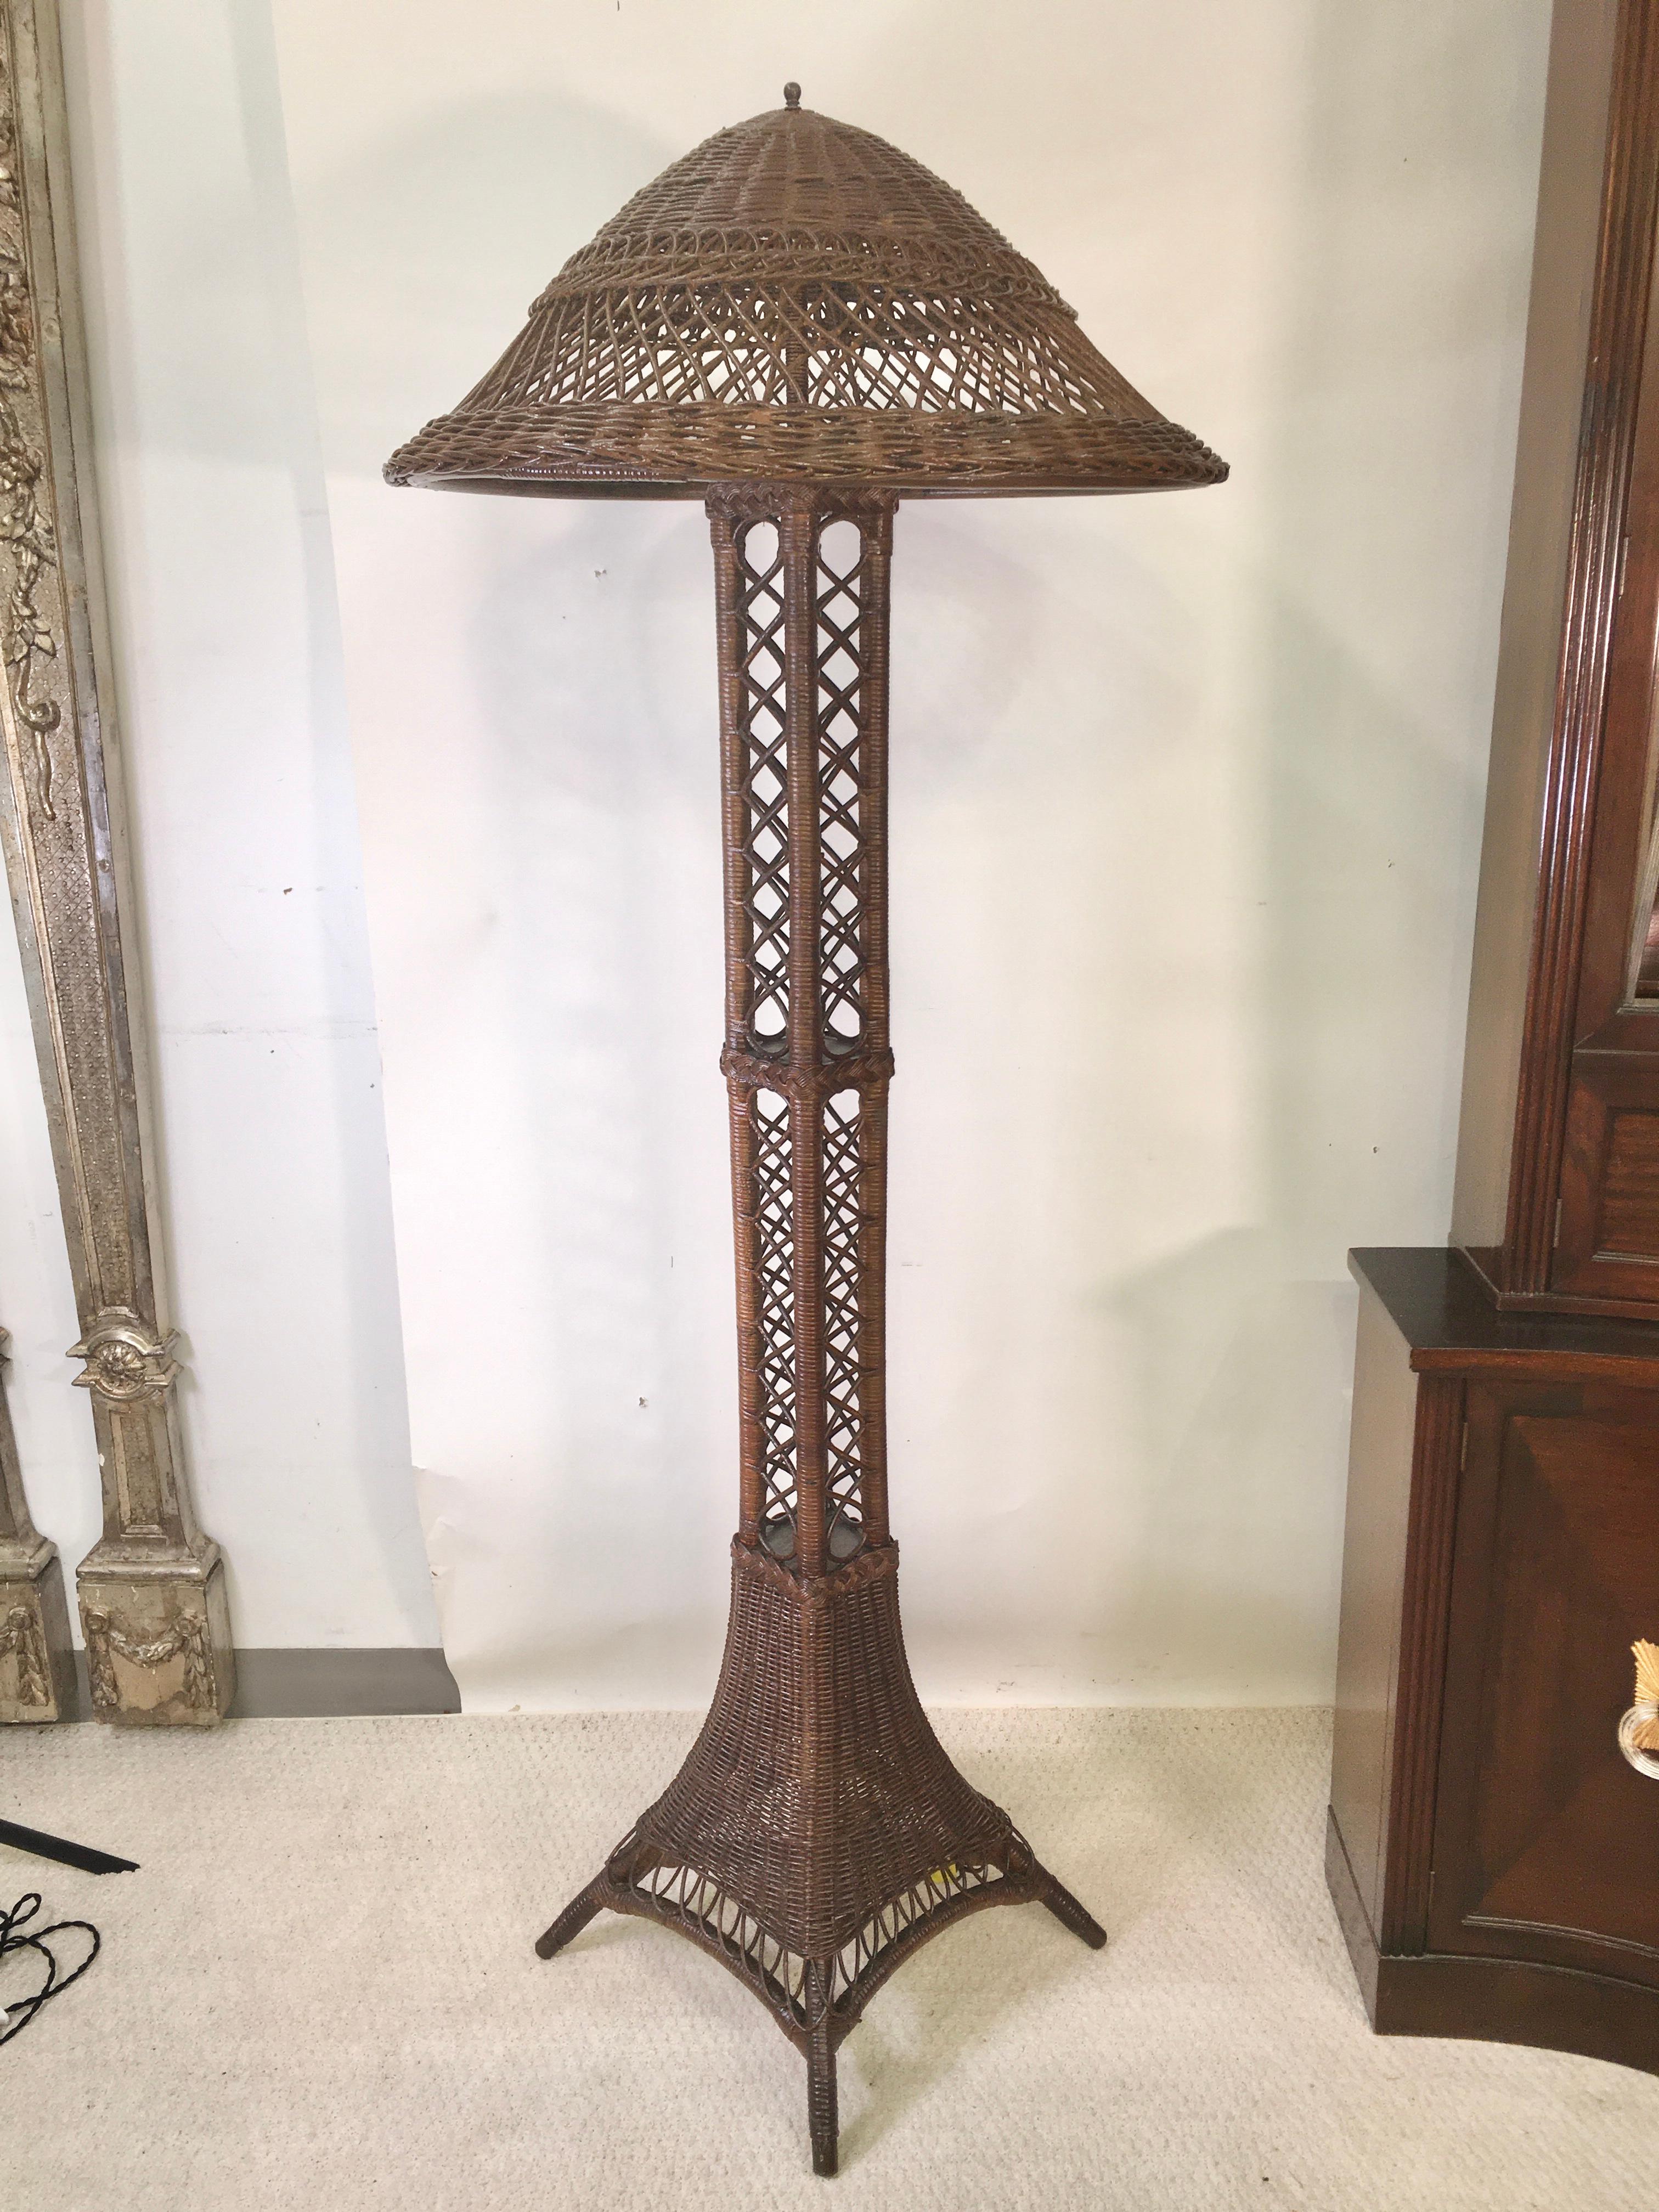 Art Deco Wicker Floor Lamp in Eiffel Tower Form In Good Condition For Sale In Hanover, MA